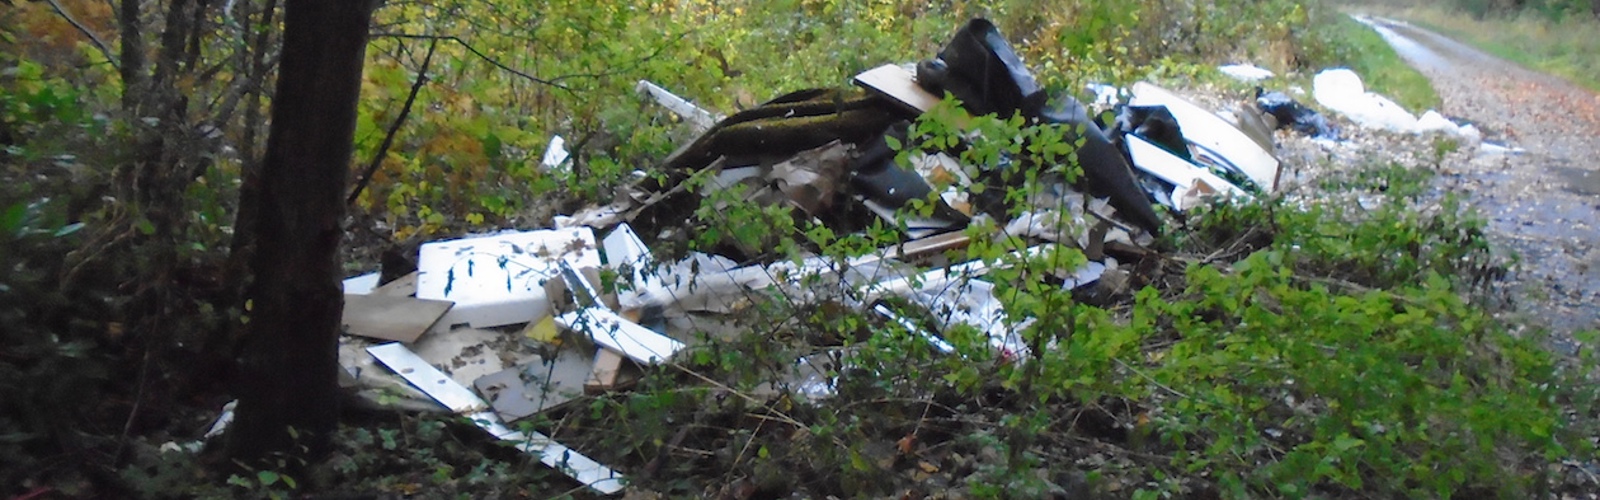 Fly-tipping in Stapleford Woods, Lincolnshire